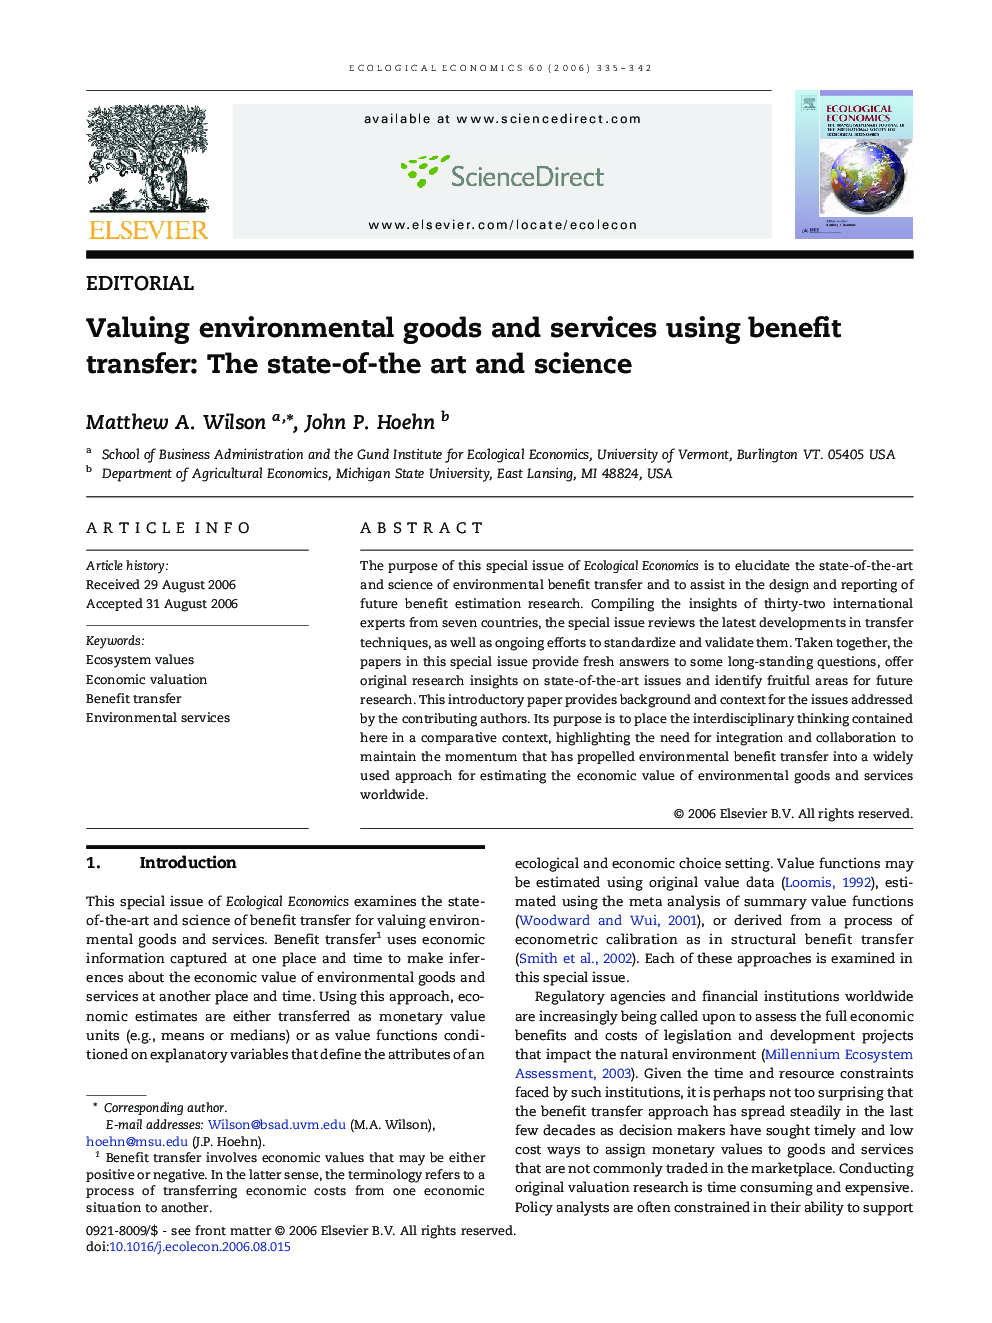 EDITORIALValuing environmental goods and services using benefit transfer: The state-of-the art and science